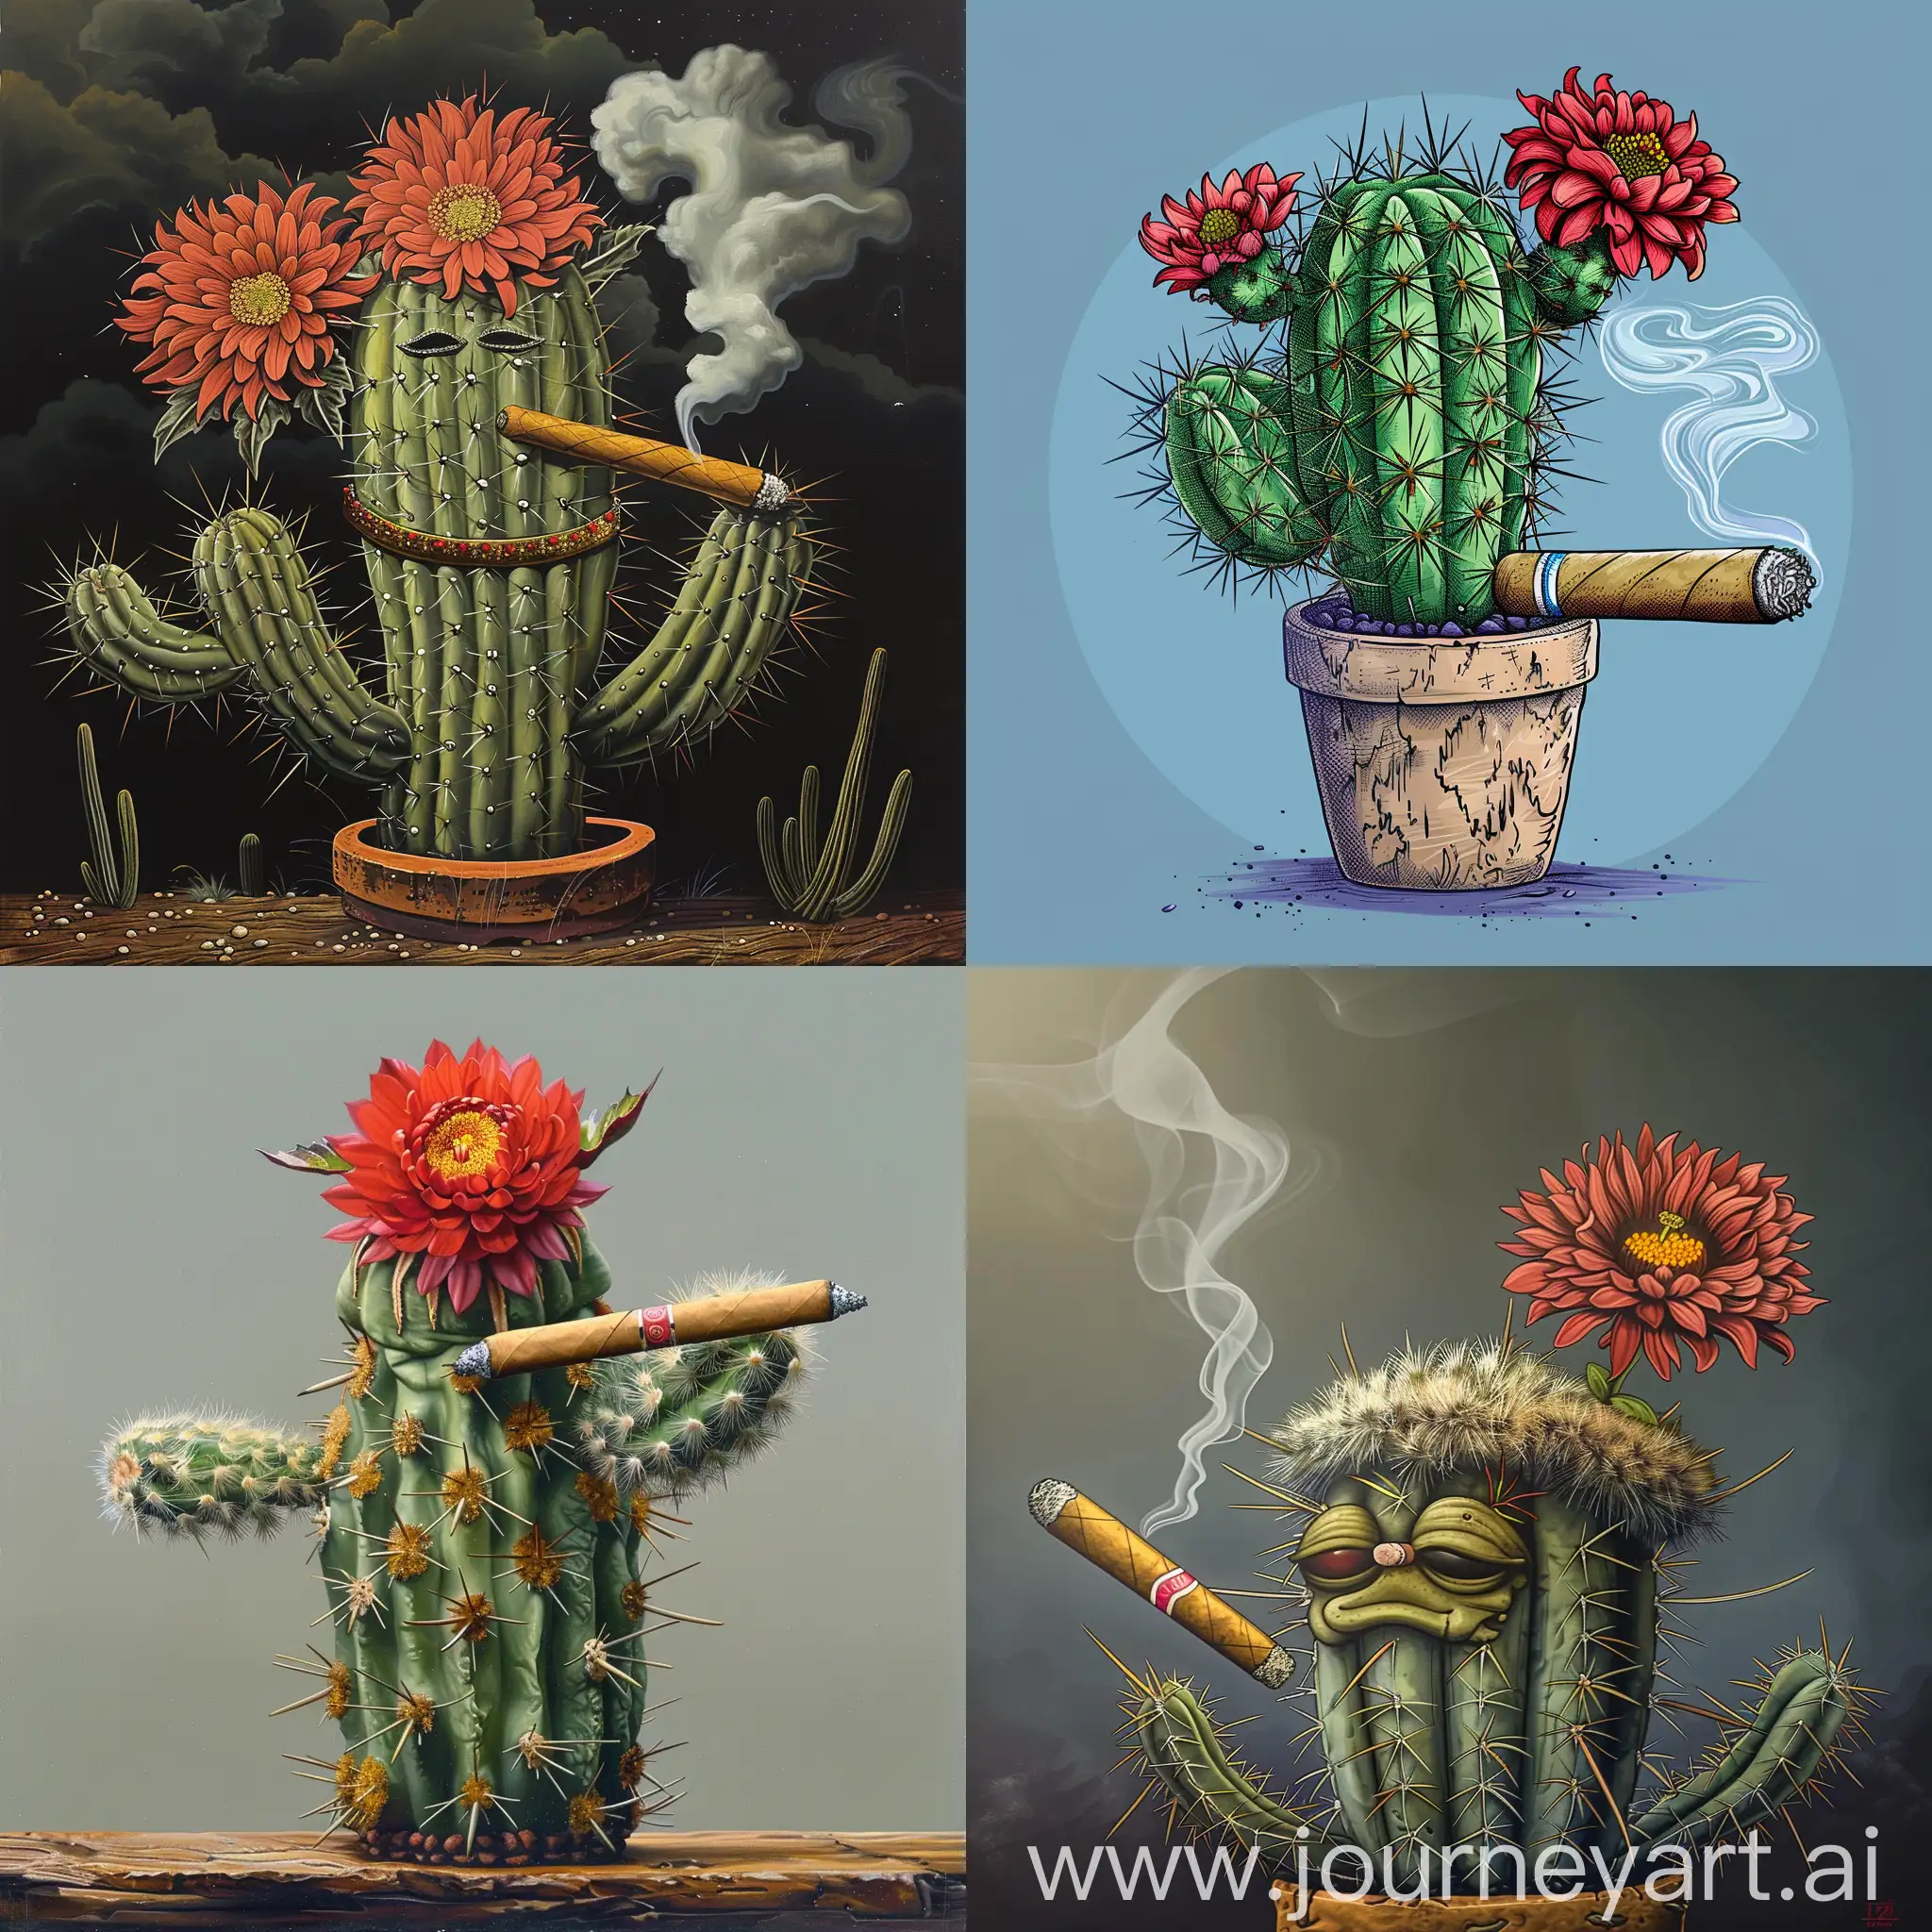 Cactus with a cigar and a headband with a scarlet chrysanthemum